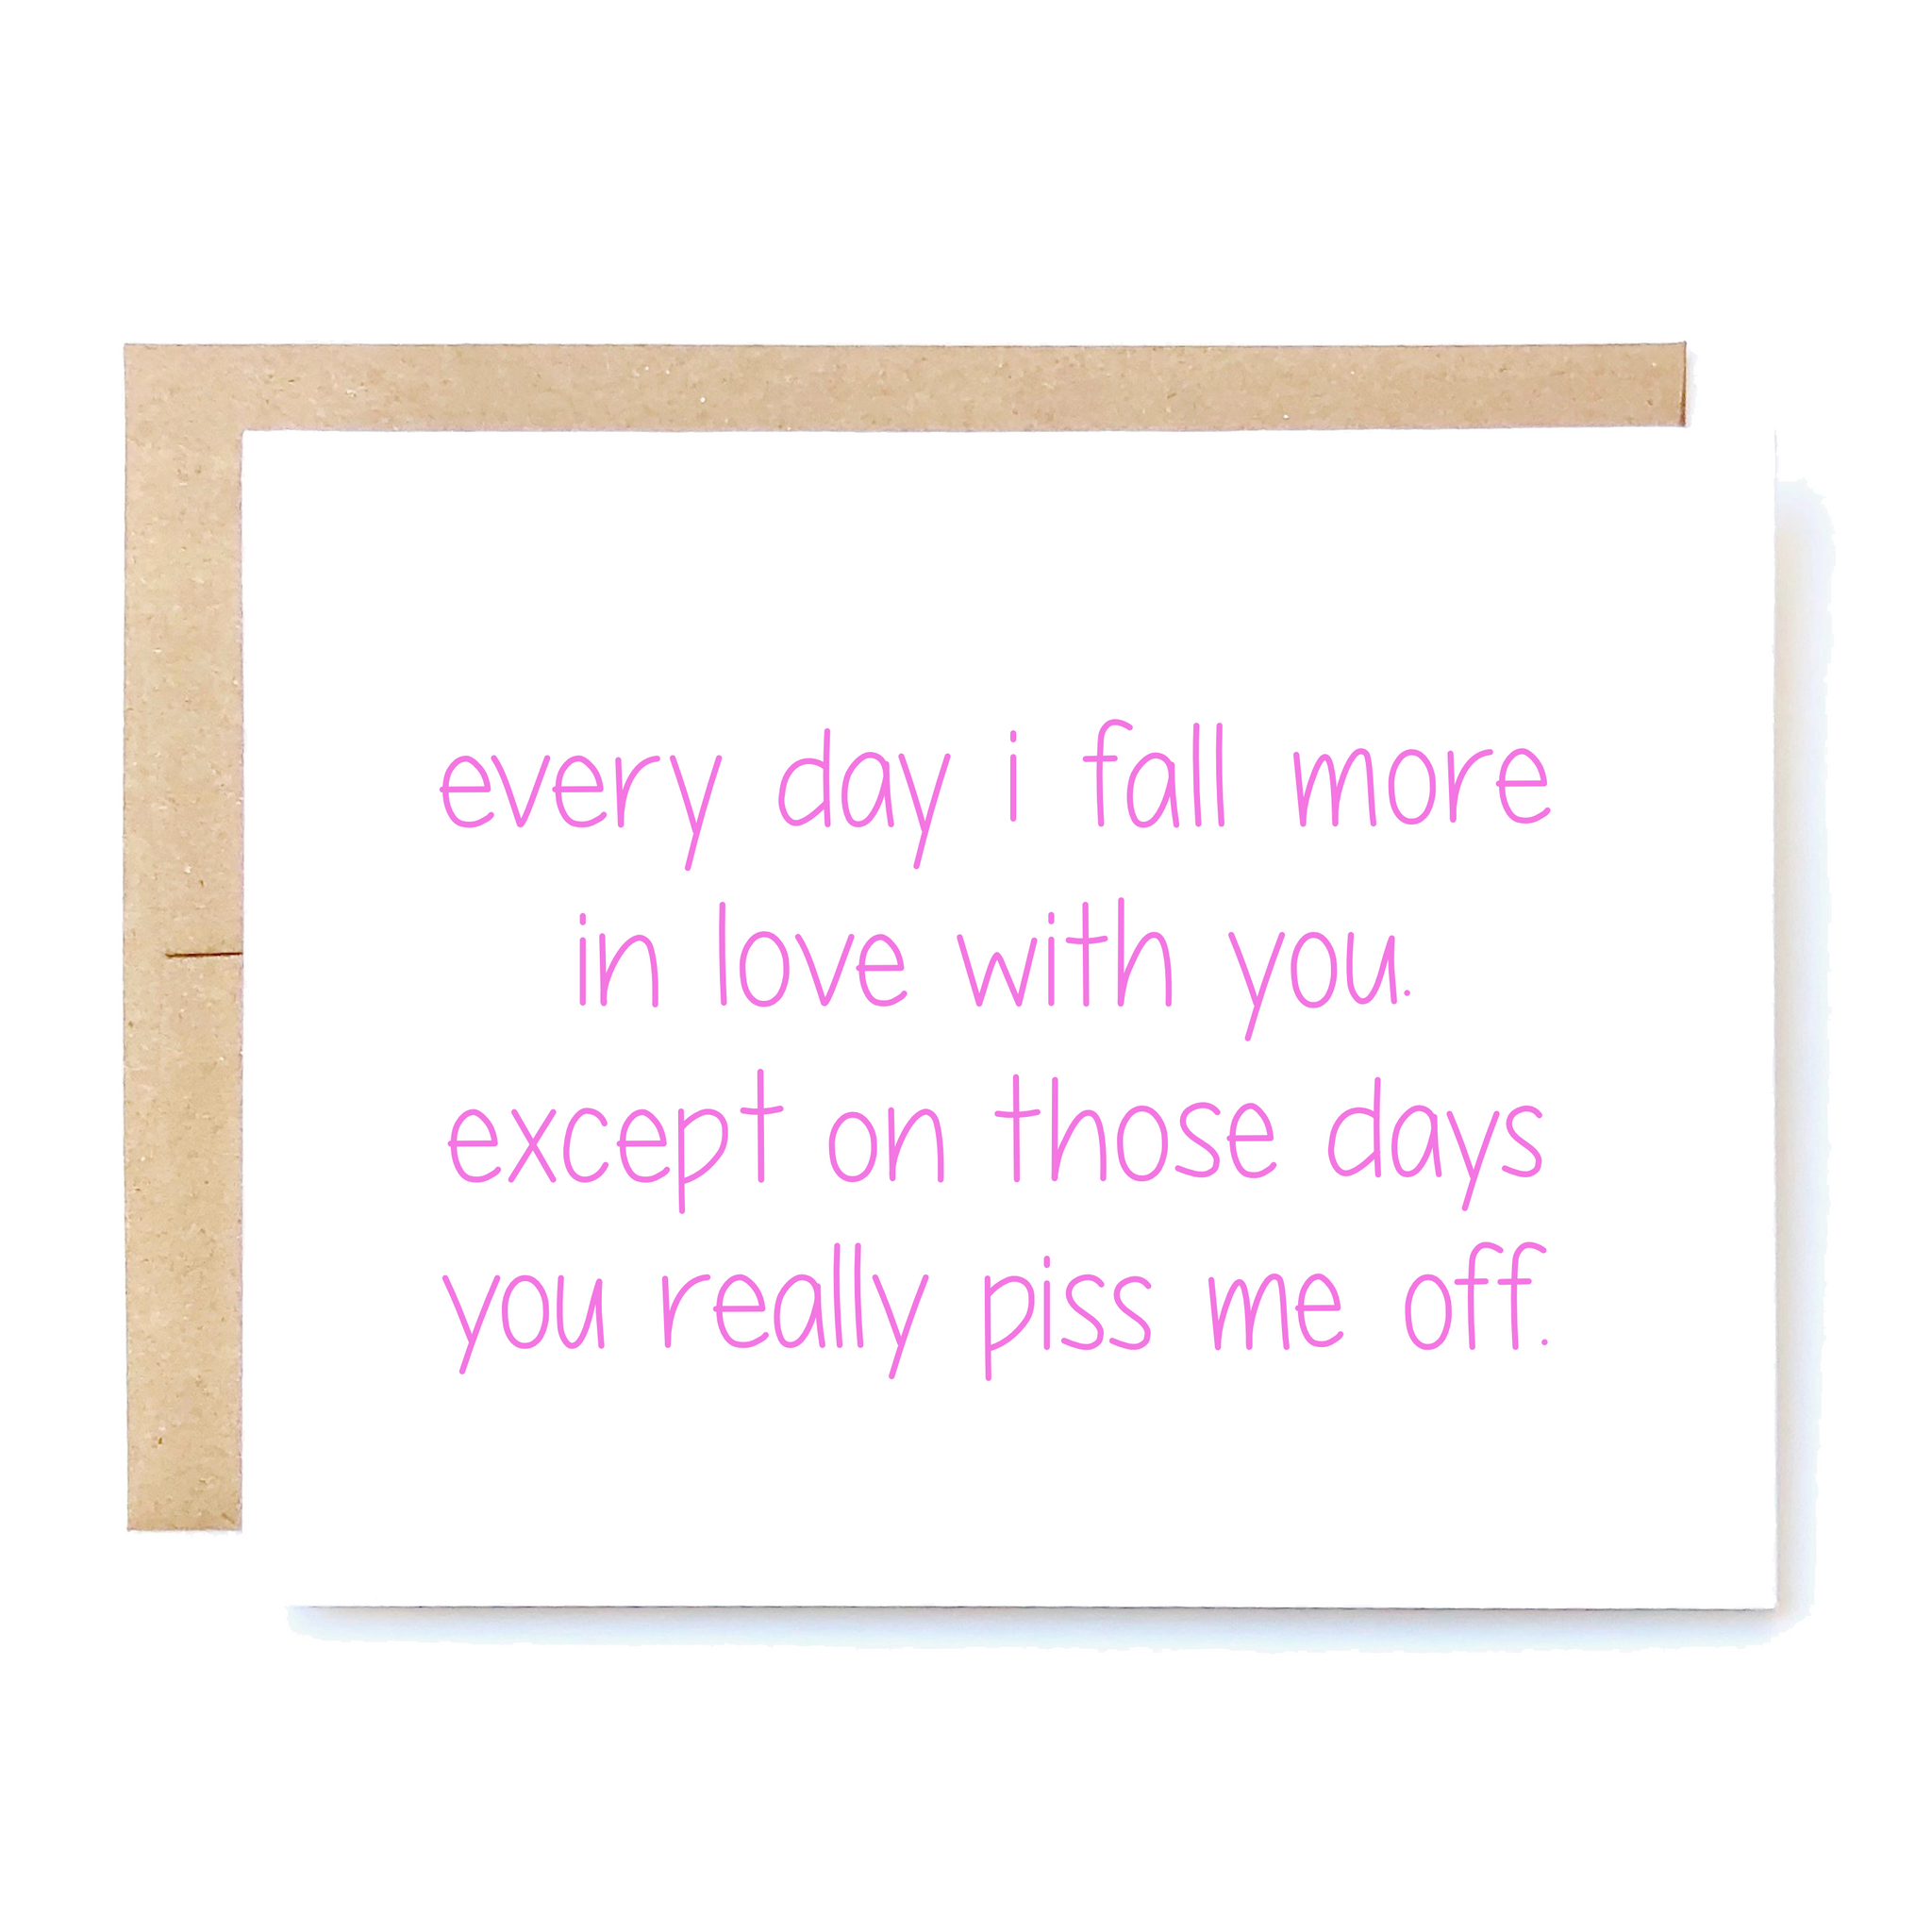 Card Front: Every day I fall more in love with you. Except on those days you really piss me off. 